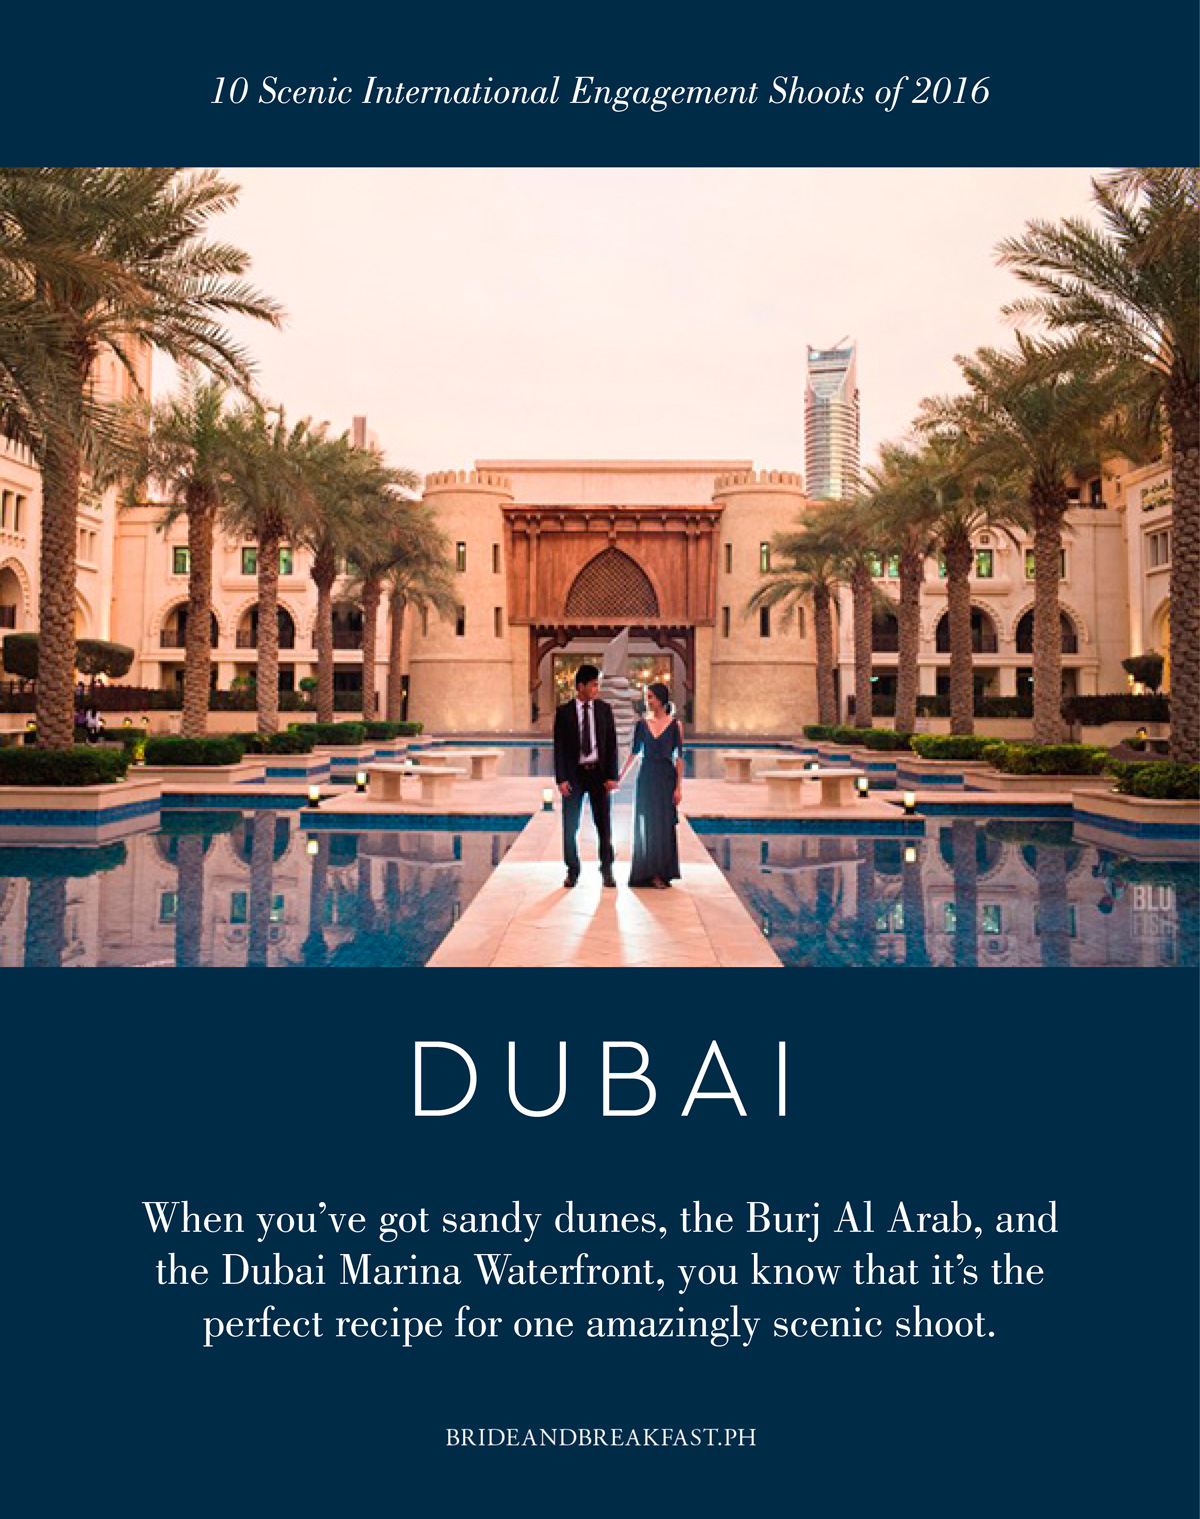 8. Dubai When you've got sandy dunes, the Burj Al Arab, and the Dubai Marina Waterfront, you know that it's the perfect recipe for one amazingly scenic shoot.